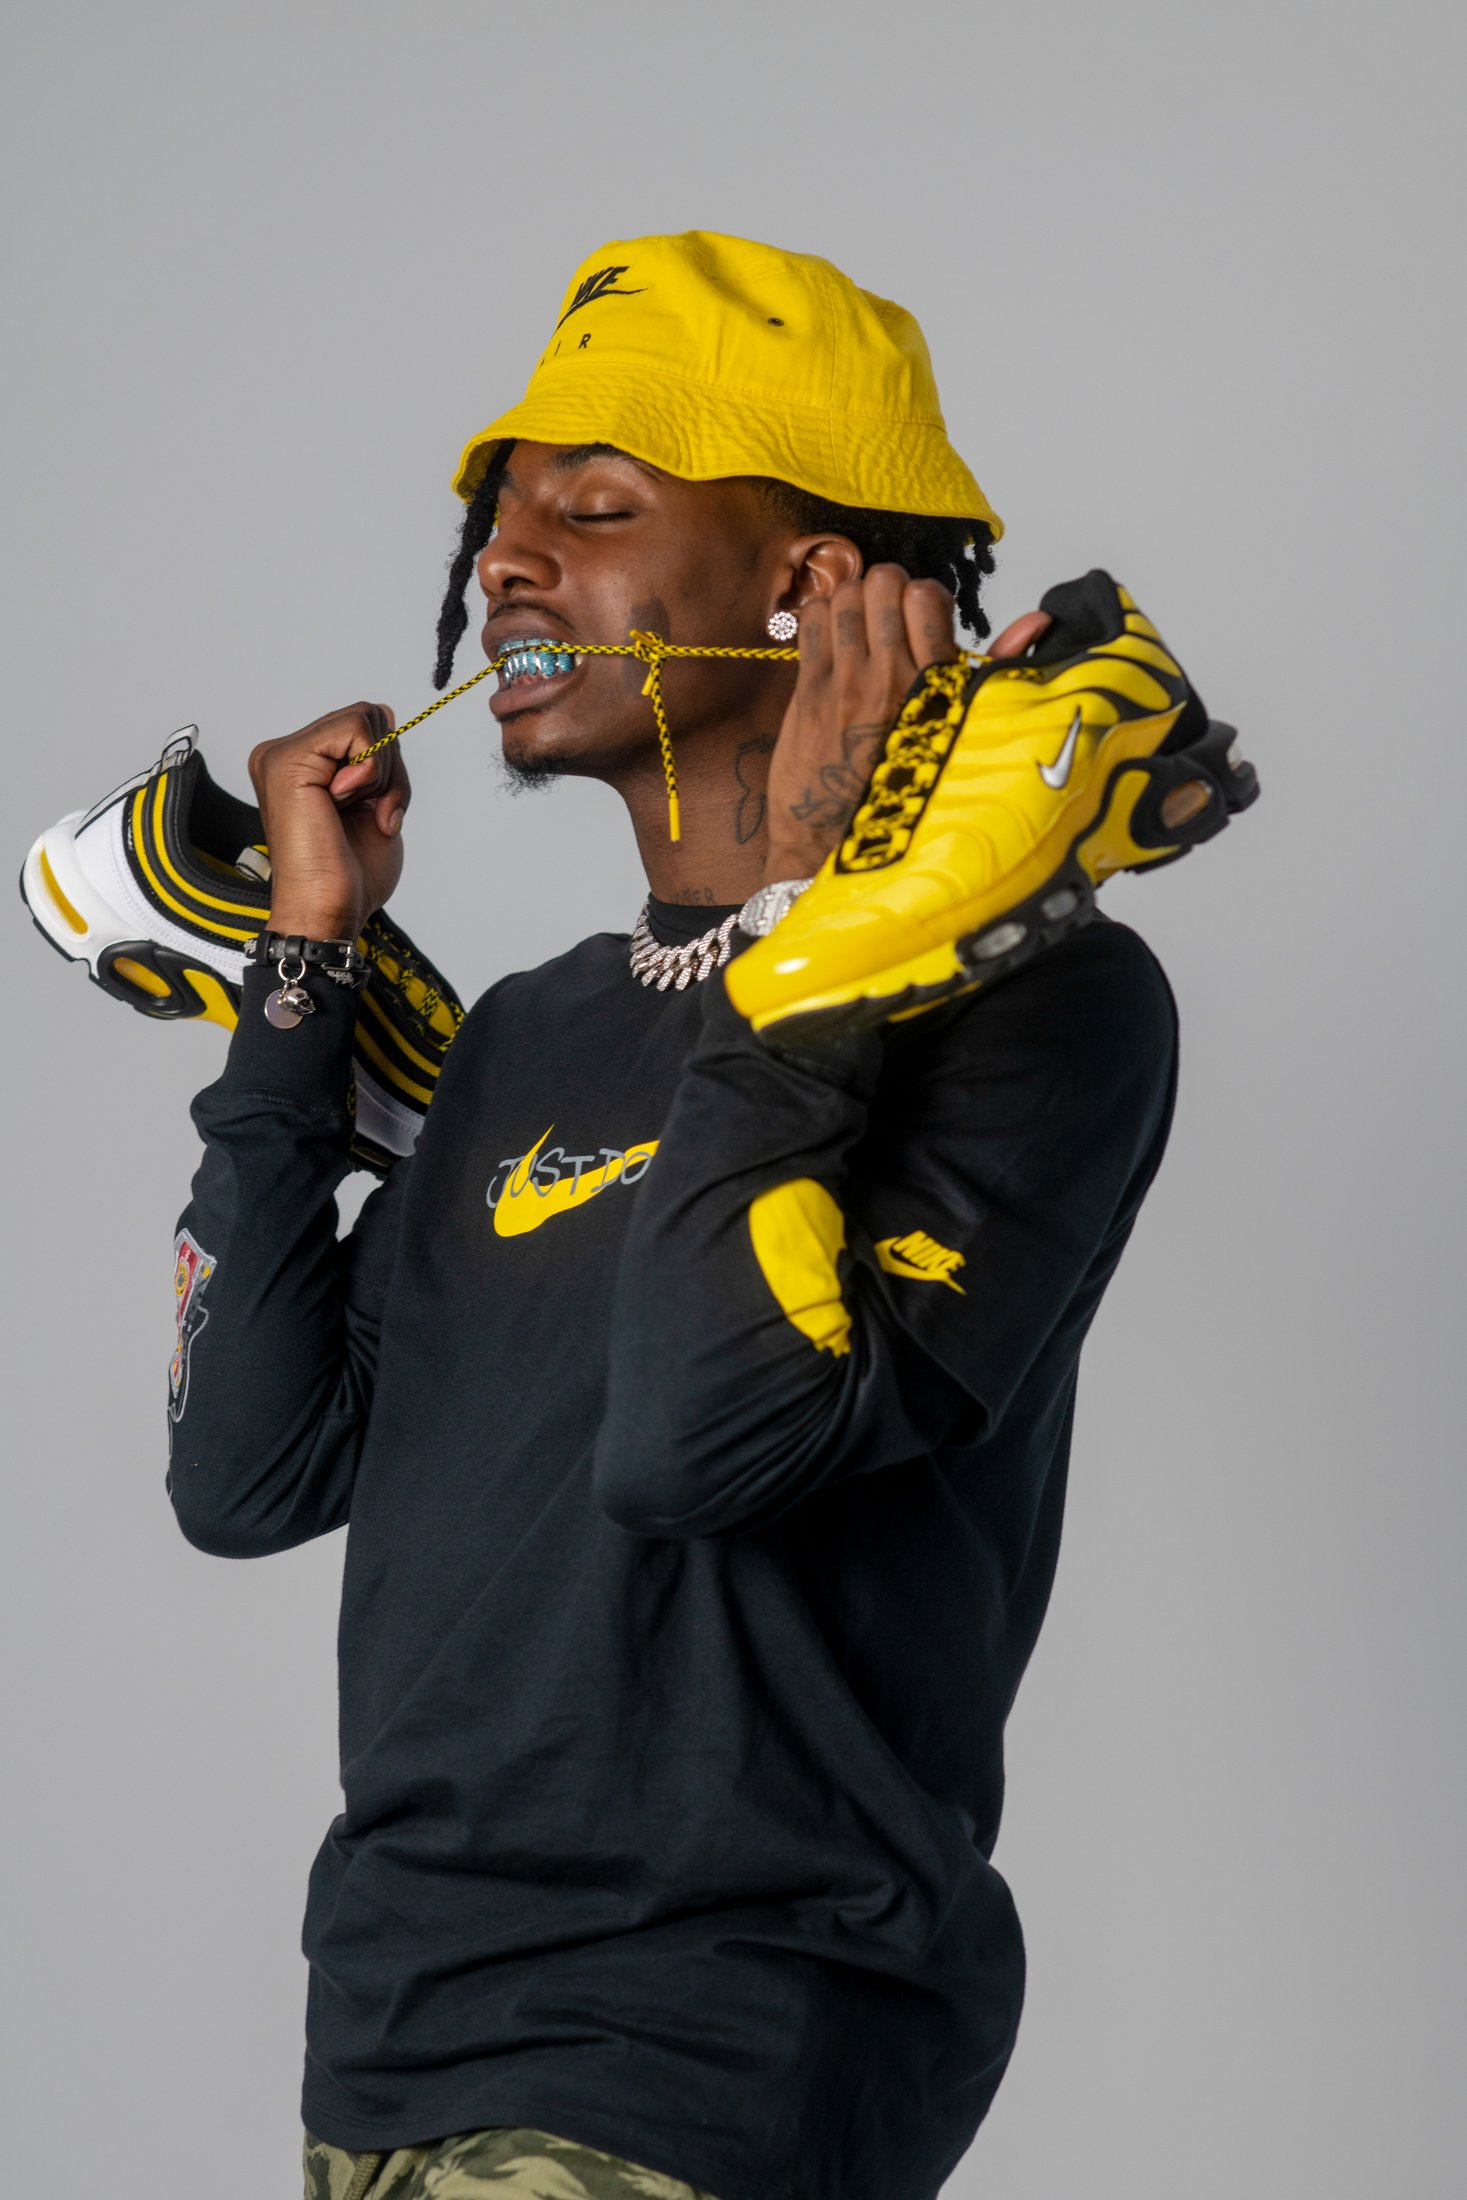 B/R Kicks on Twitter: "The Nike Frequency Air Plus, Air 97, and Air 95 releases September 14 at Foot Locker @playboicarti https://t.co/48JDvZp4xi" Twitter